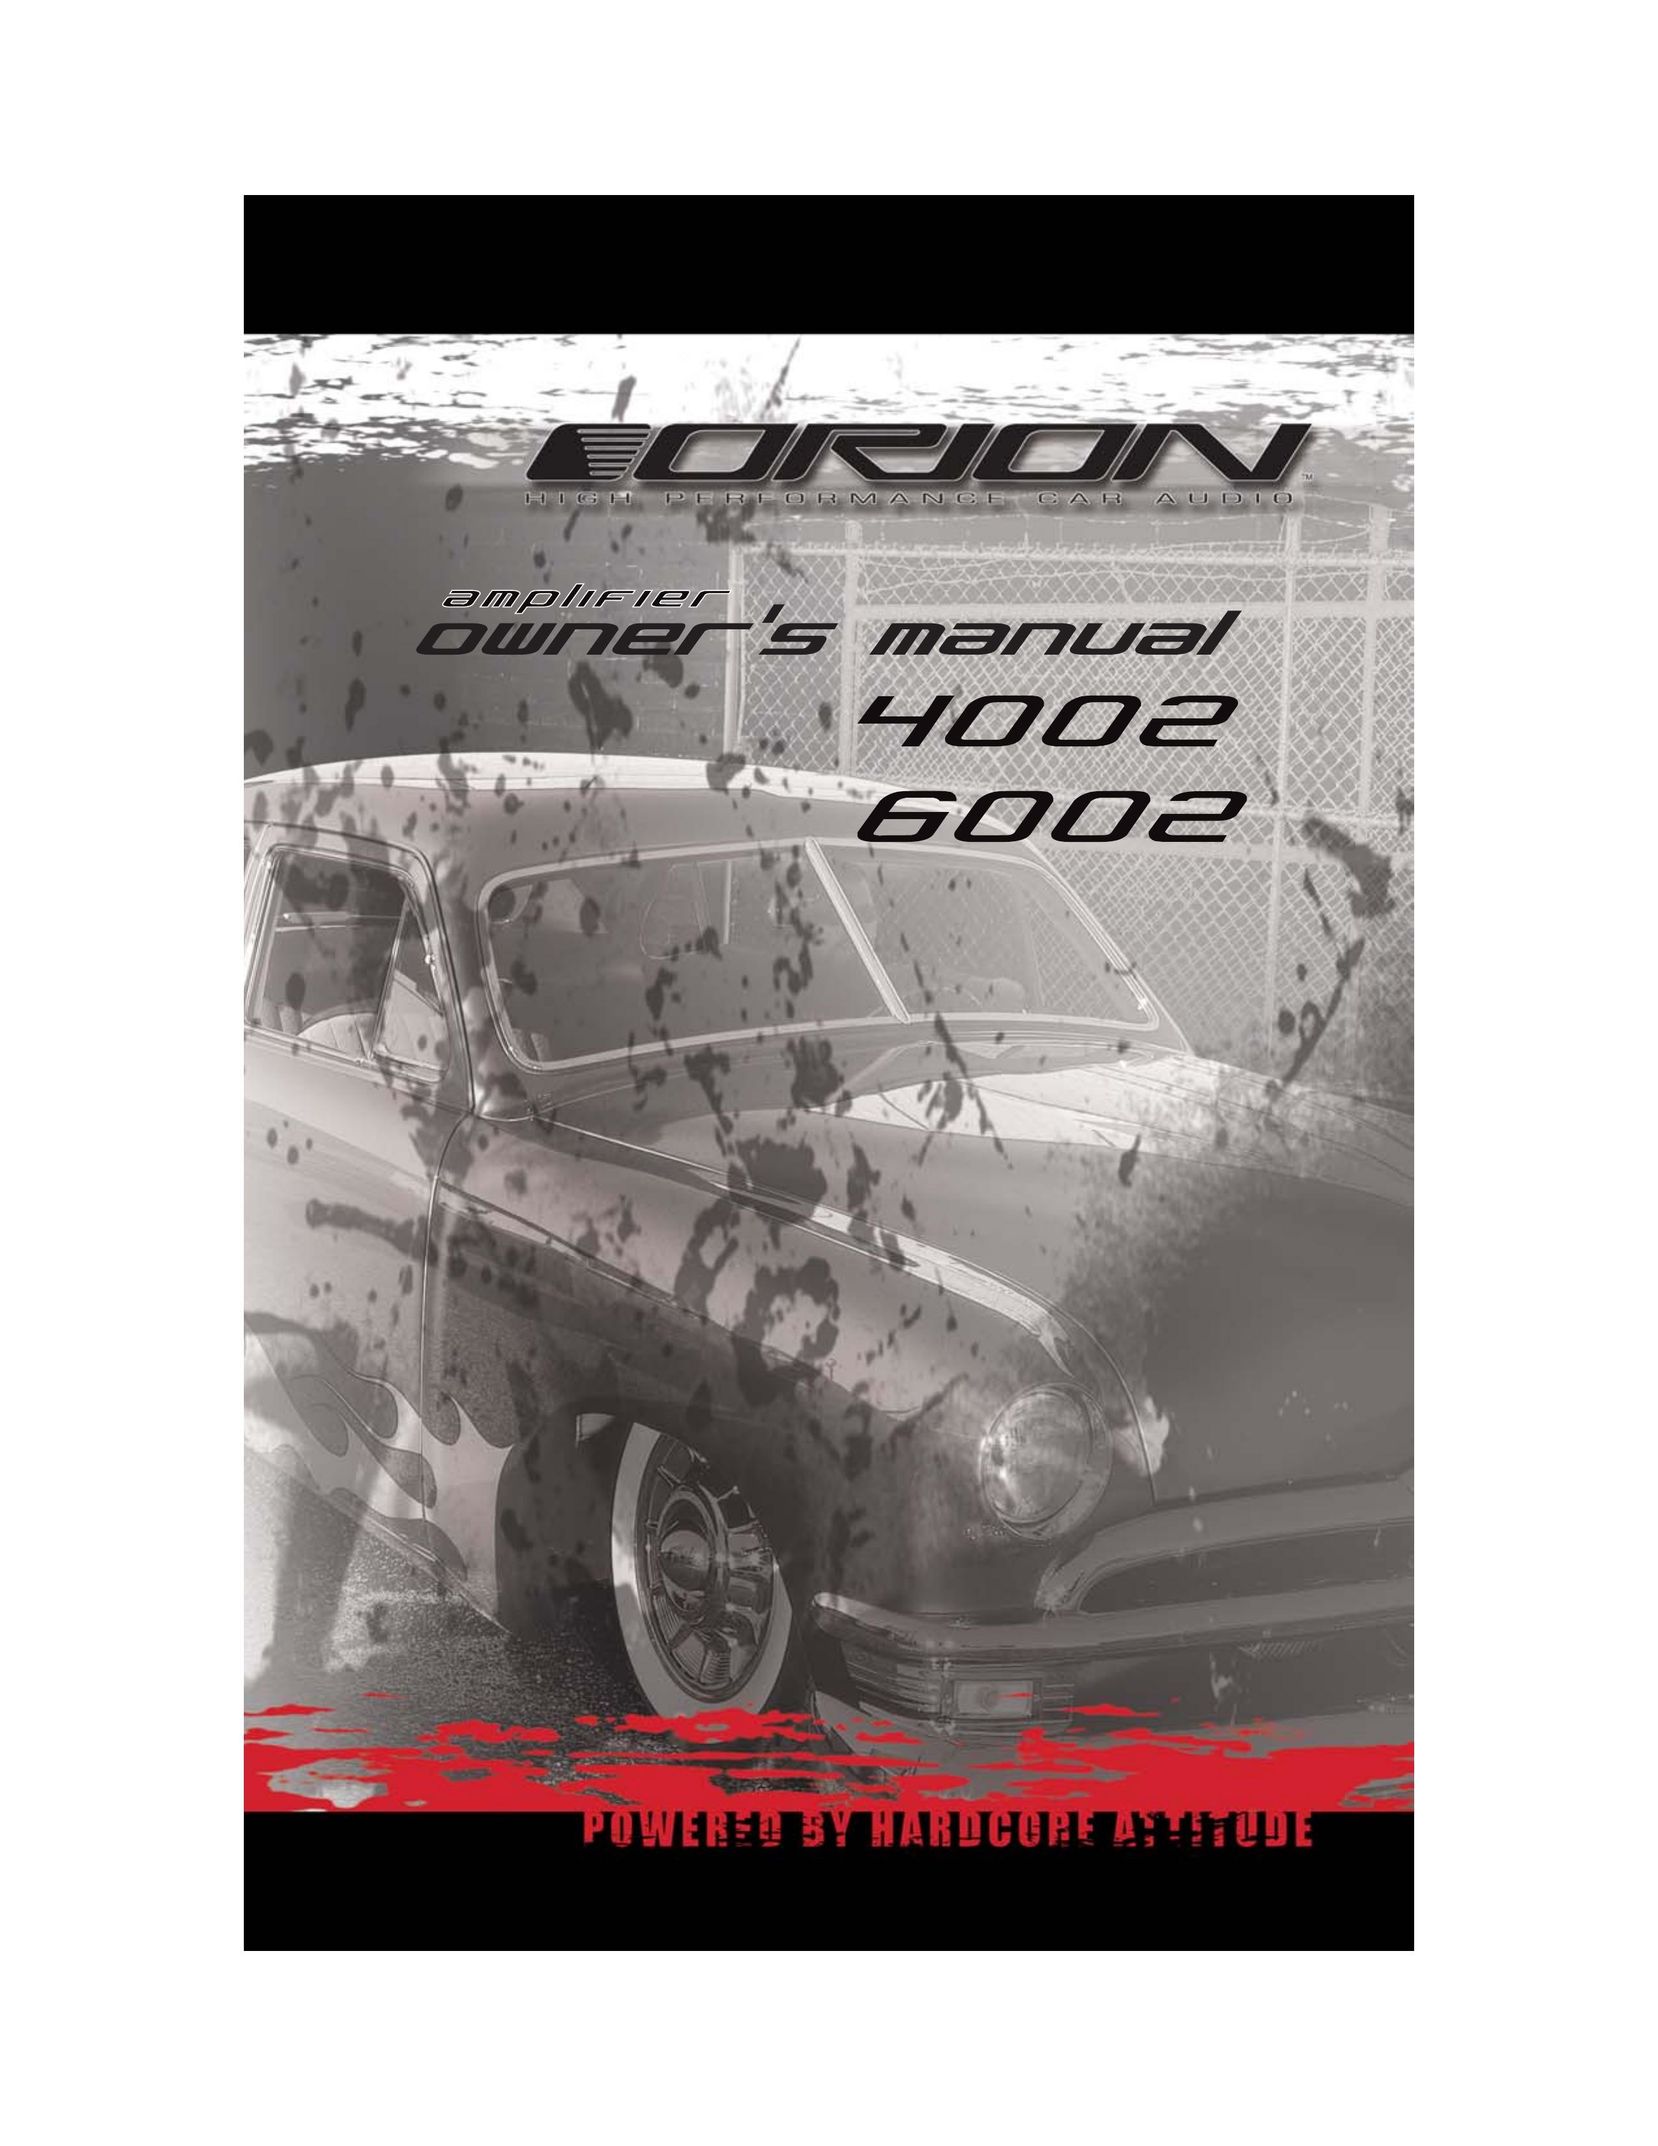 Orion Car Audio 6002 Stereo Amplifier User Manual